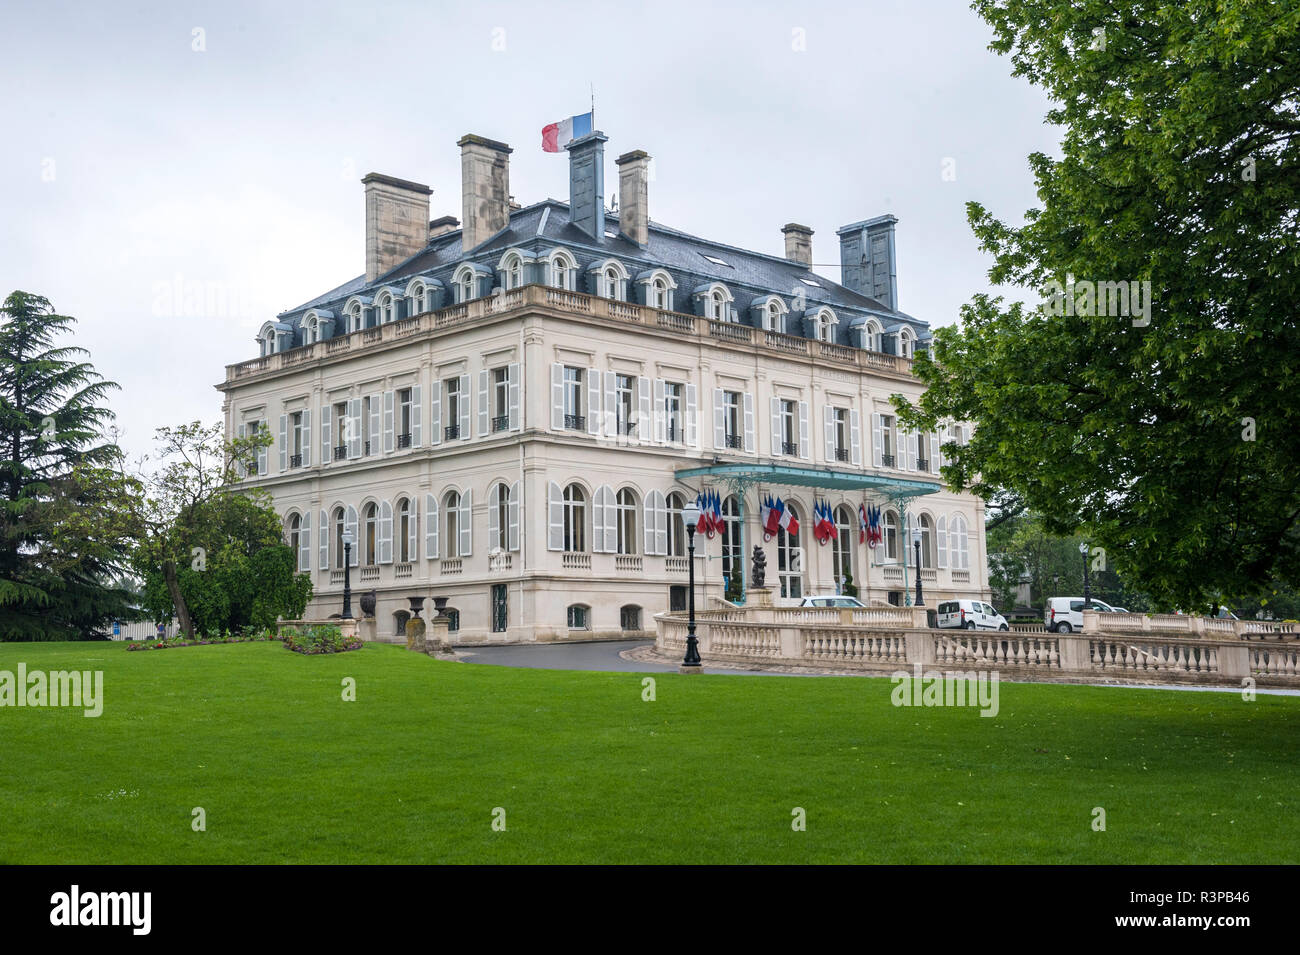 City Hall, Epernay, Champagne, France Stock Photo